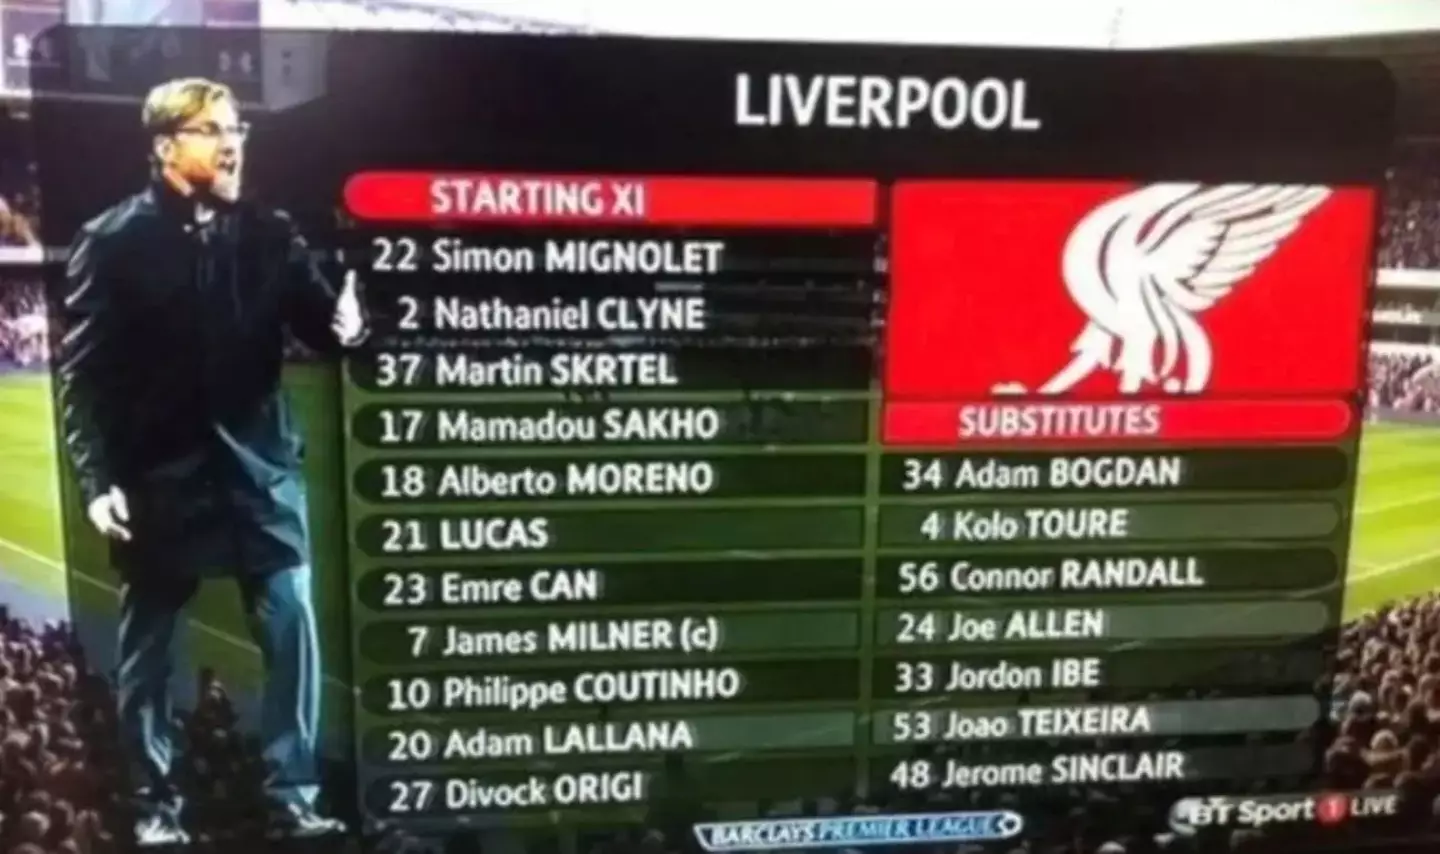 Liverpool's starting line-up in the match against Spurs (Image: Alamy)